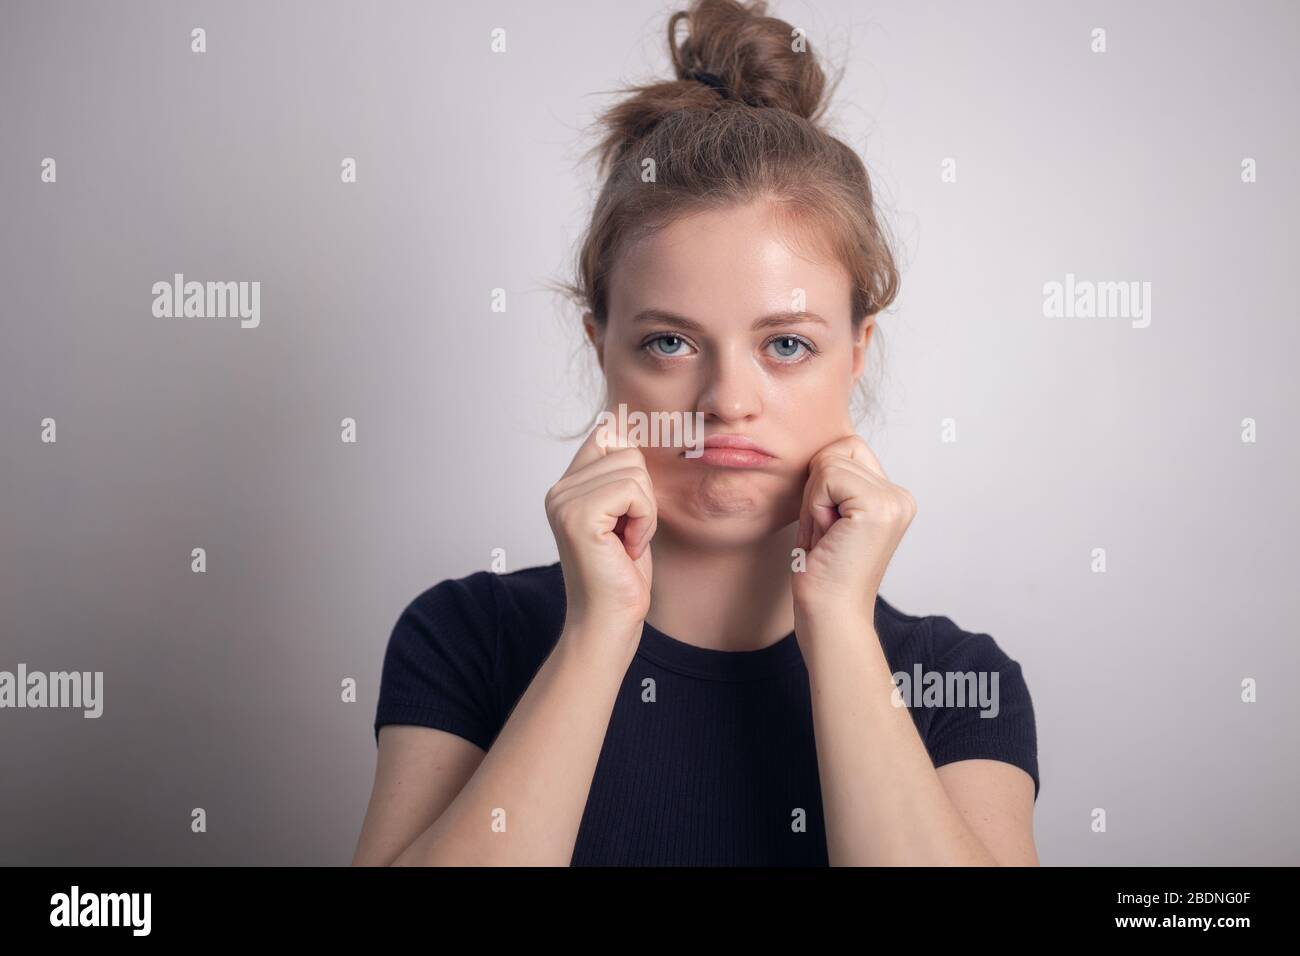 Young caucasian woman girl with double chin and chubby cheeks Stock Photo